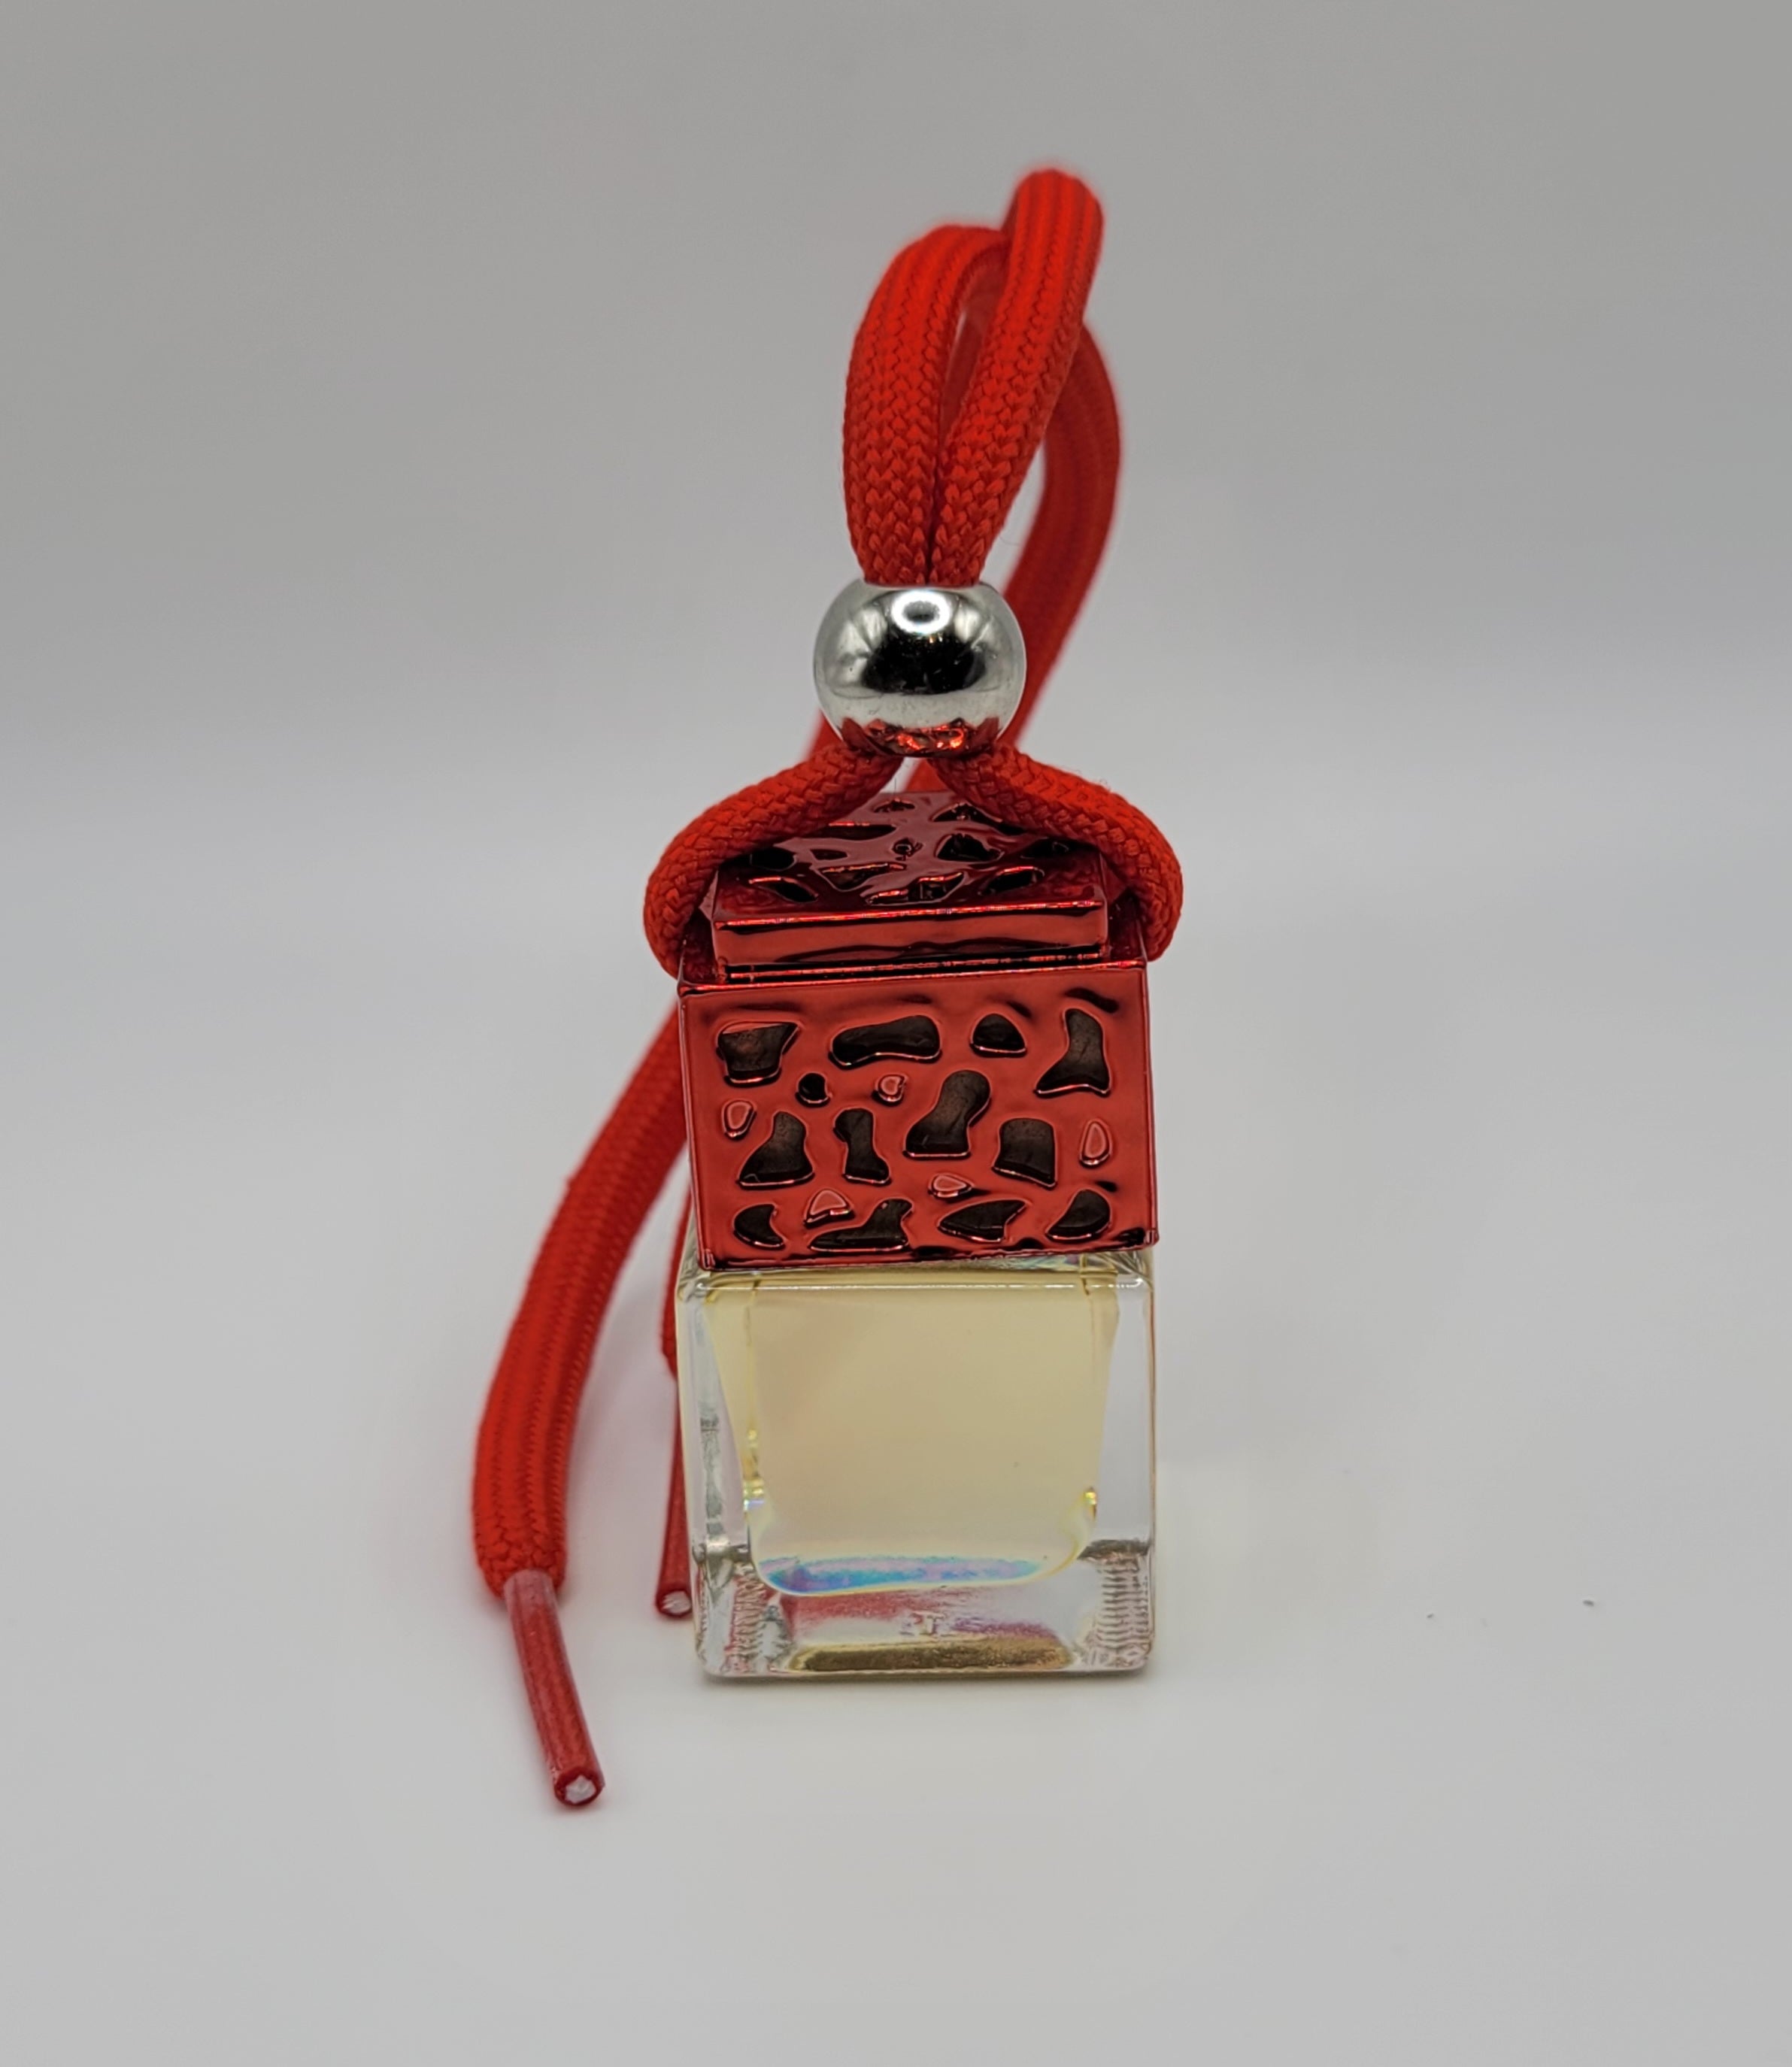 Elegant Metallic Red Car Air Fresheners. – Mandy's Handcrafted Candles